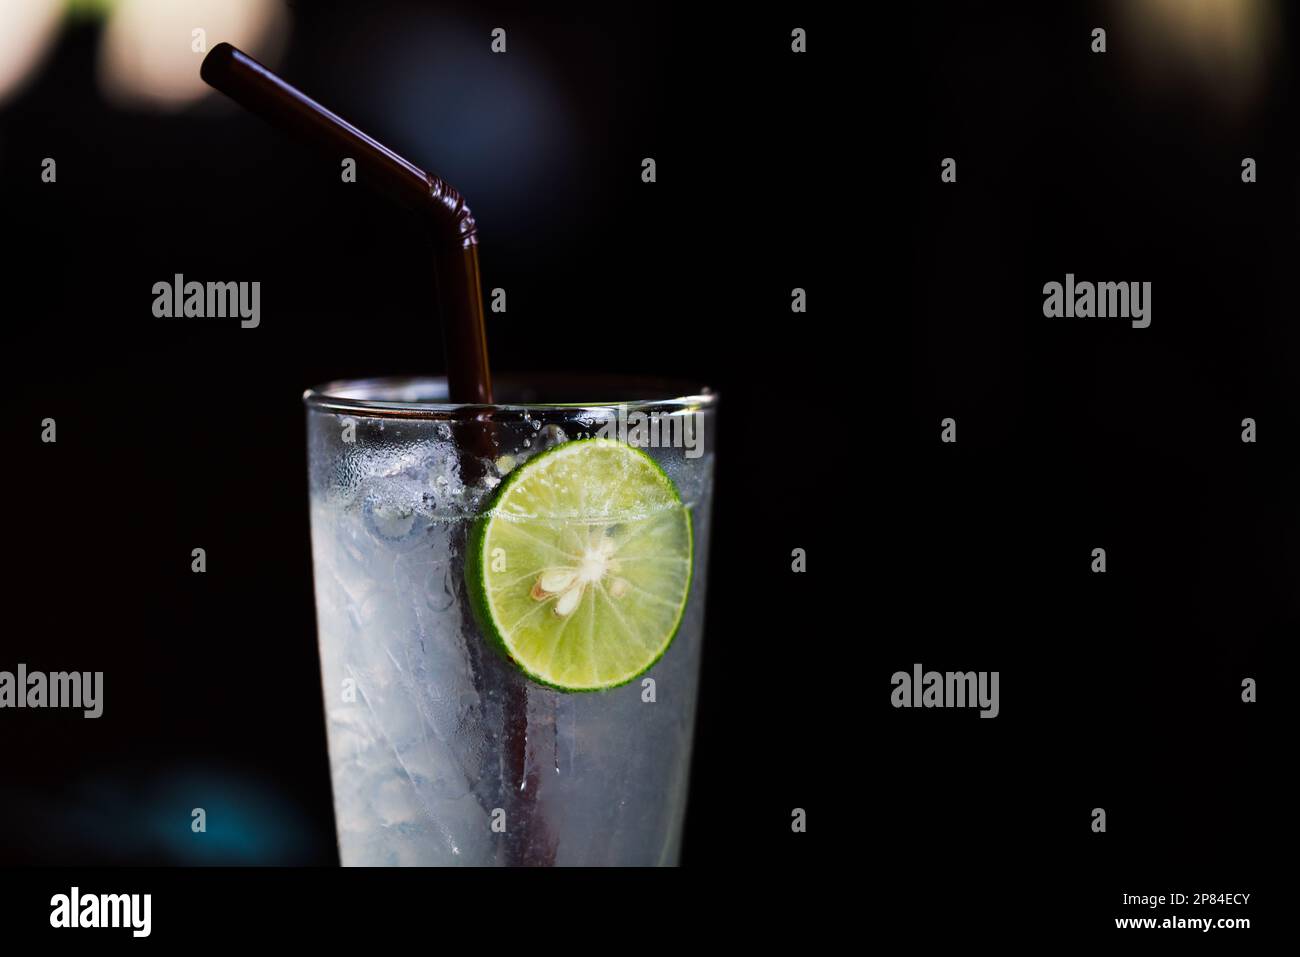 Healthy drinks, close up a glass of fresh lime soda with dark background, iced drinks fresh lime soda in cleared long glass, a piece of sliced lime, e Stock Photo